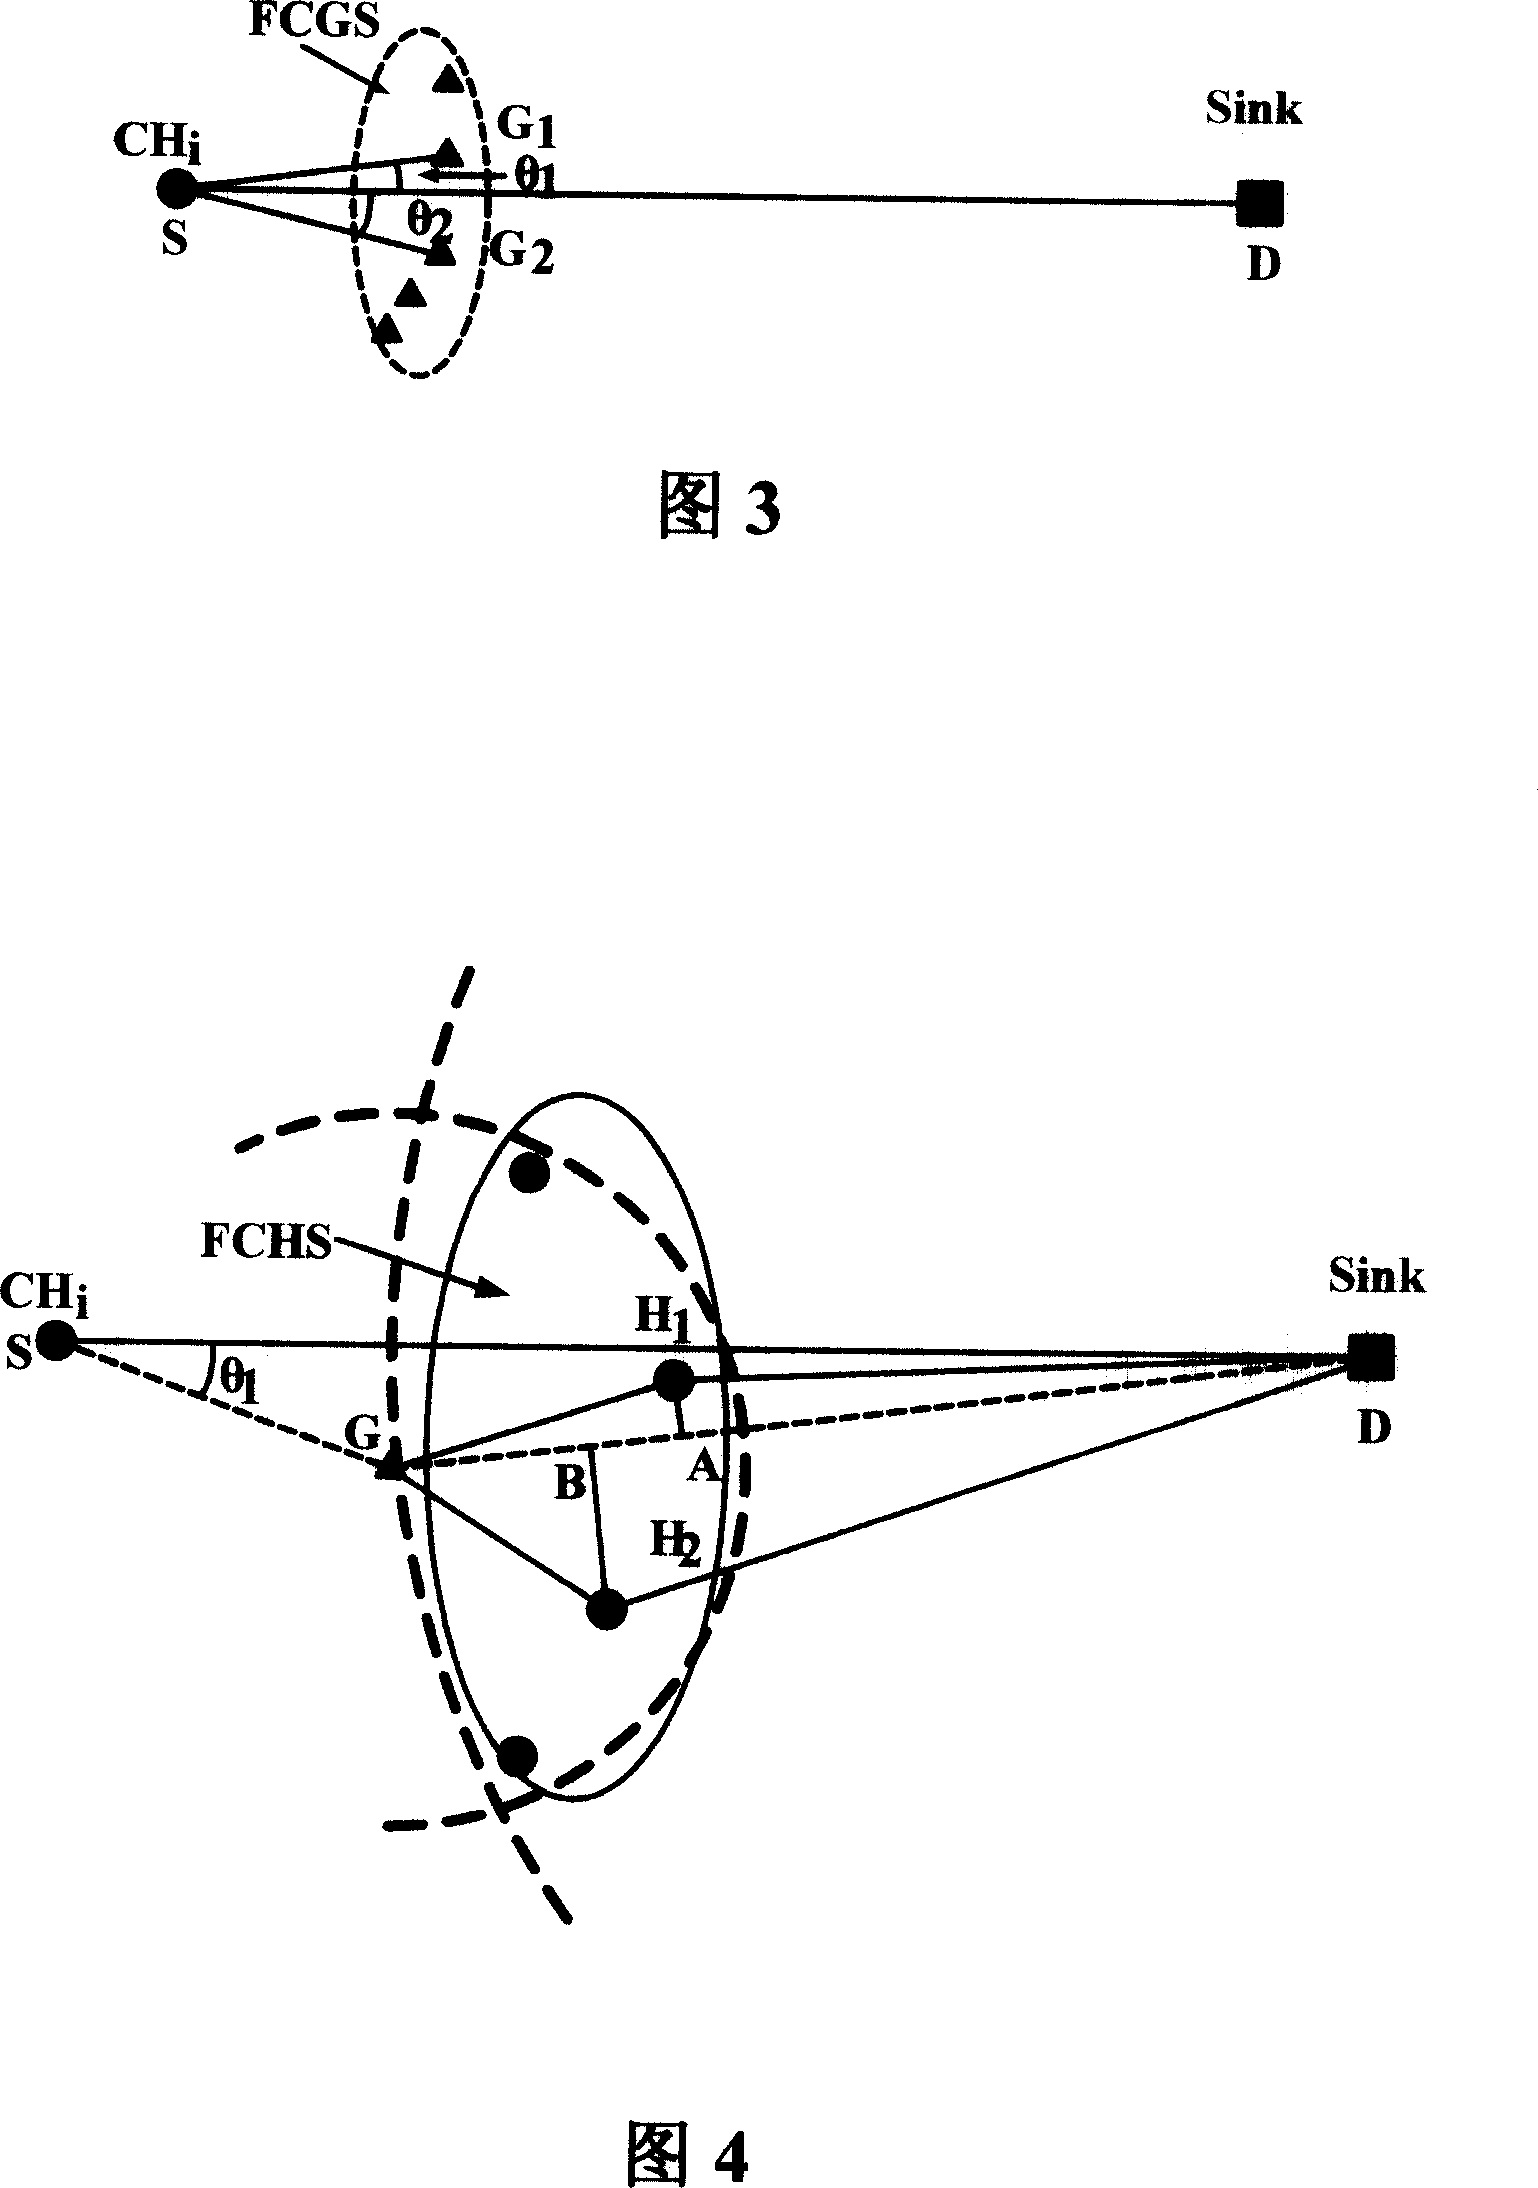 Method and system for network communication of wireless sensor